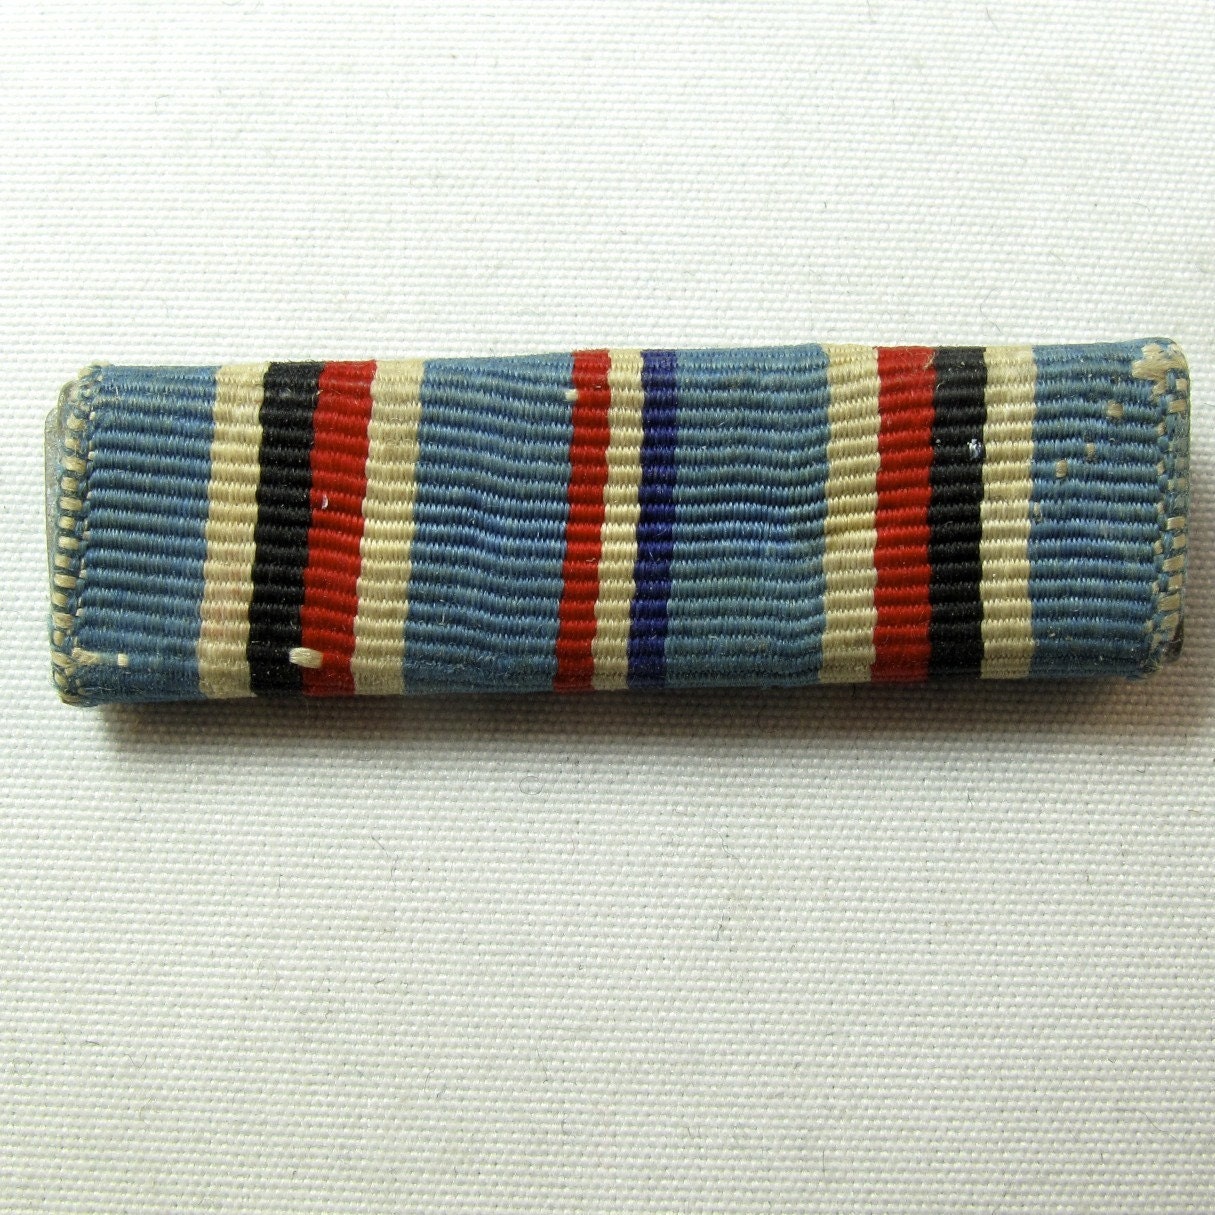 WW2 military SERVICE Ribbon Army American Campaign Medal